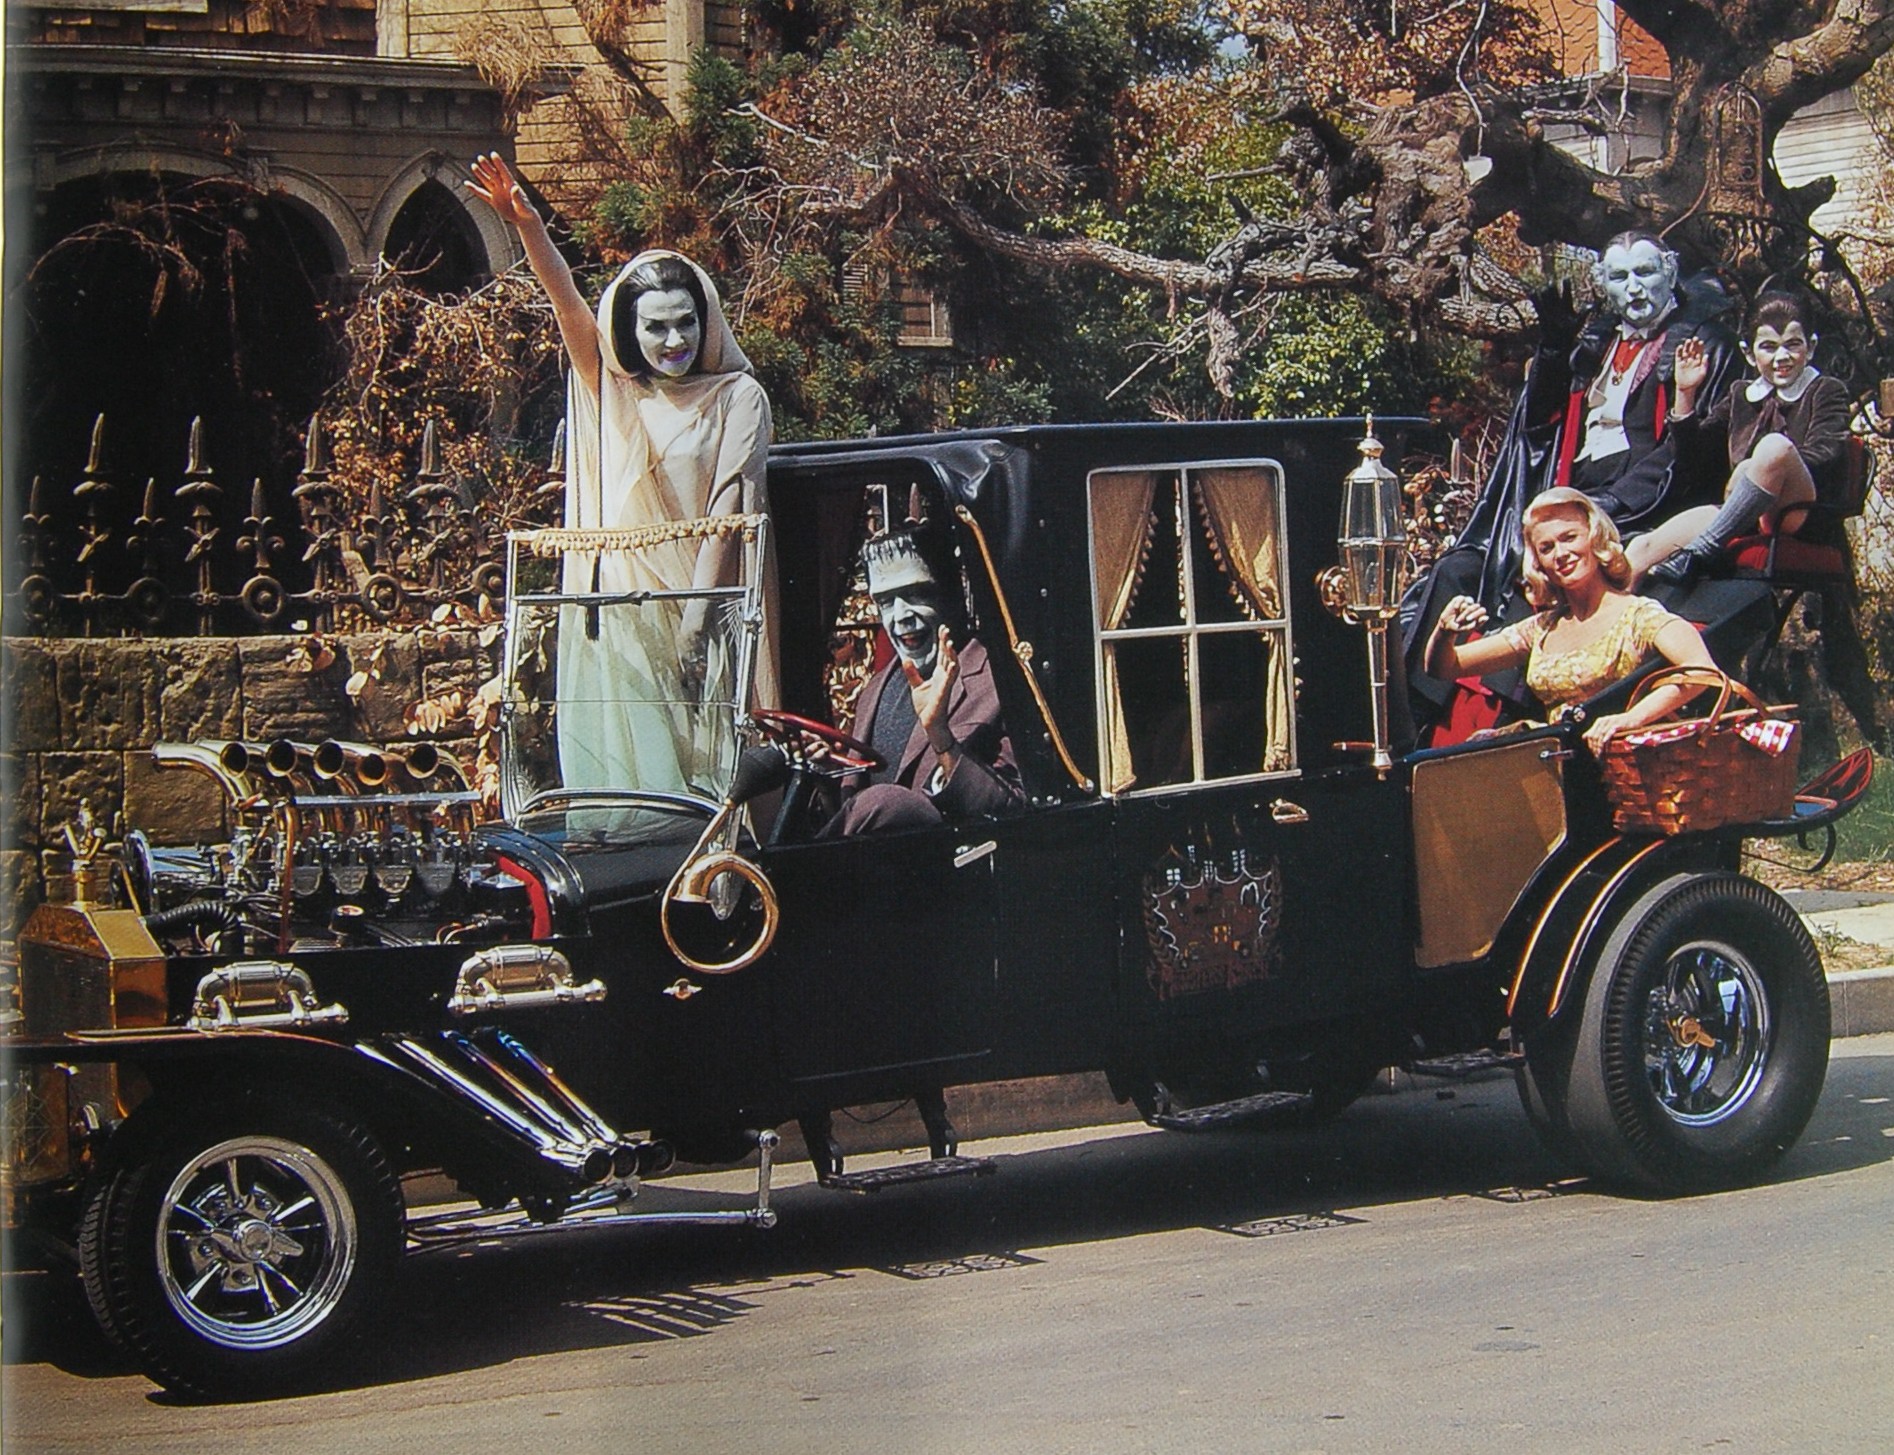 The Munsters #4